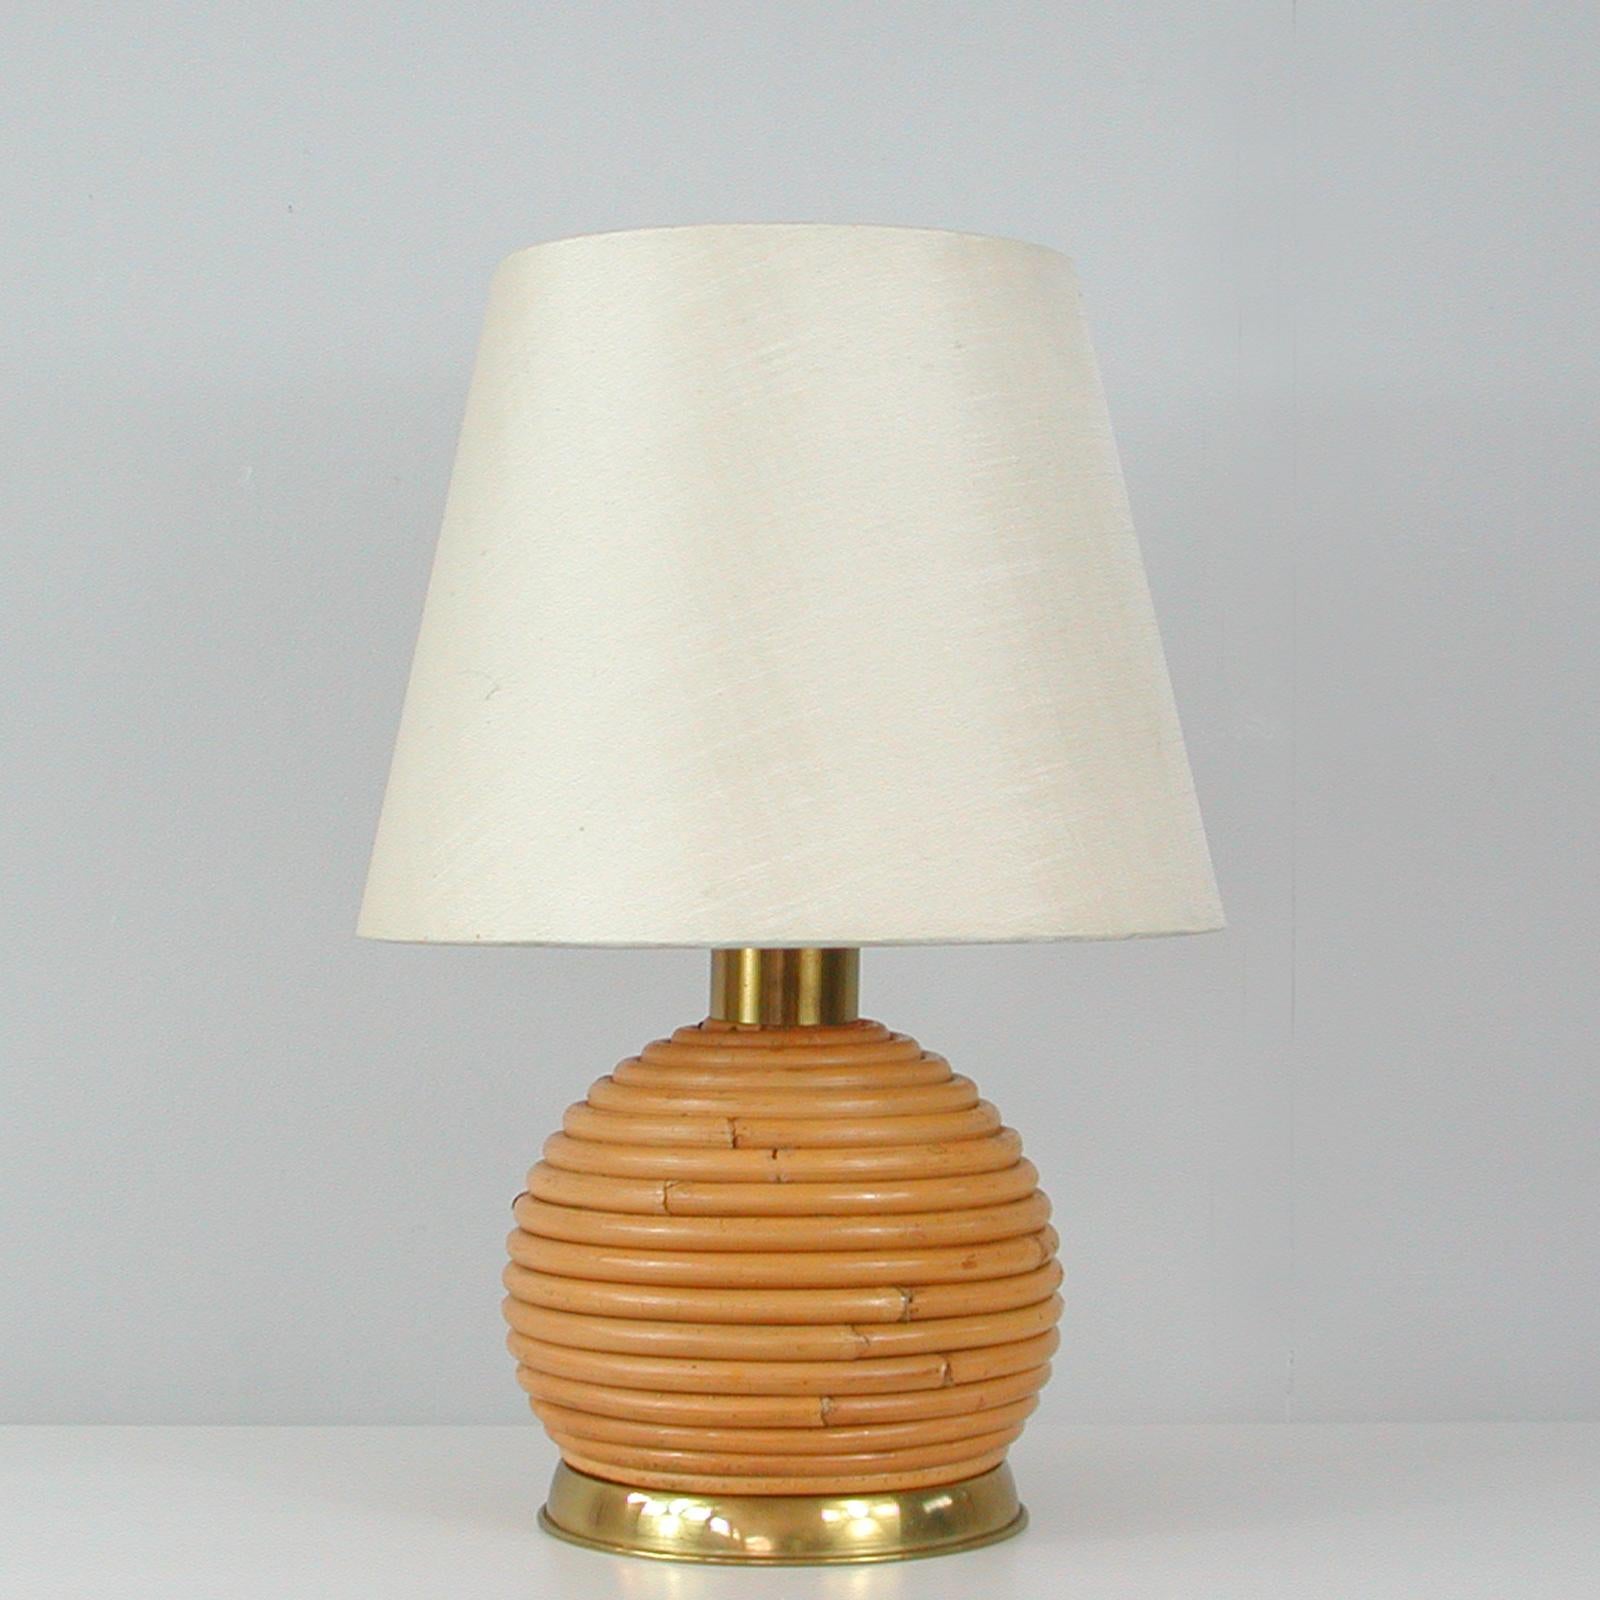 Swedish Midcentury Wicker and Brass Globe Table Lamp, 1960s For Sale 7